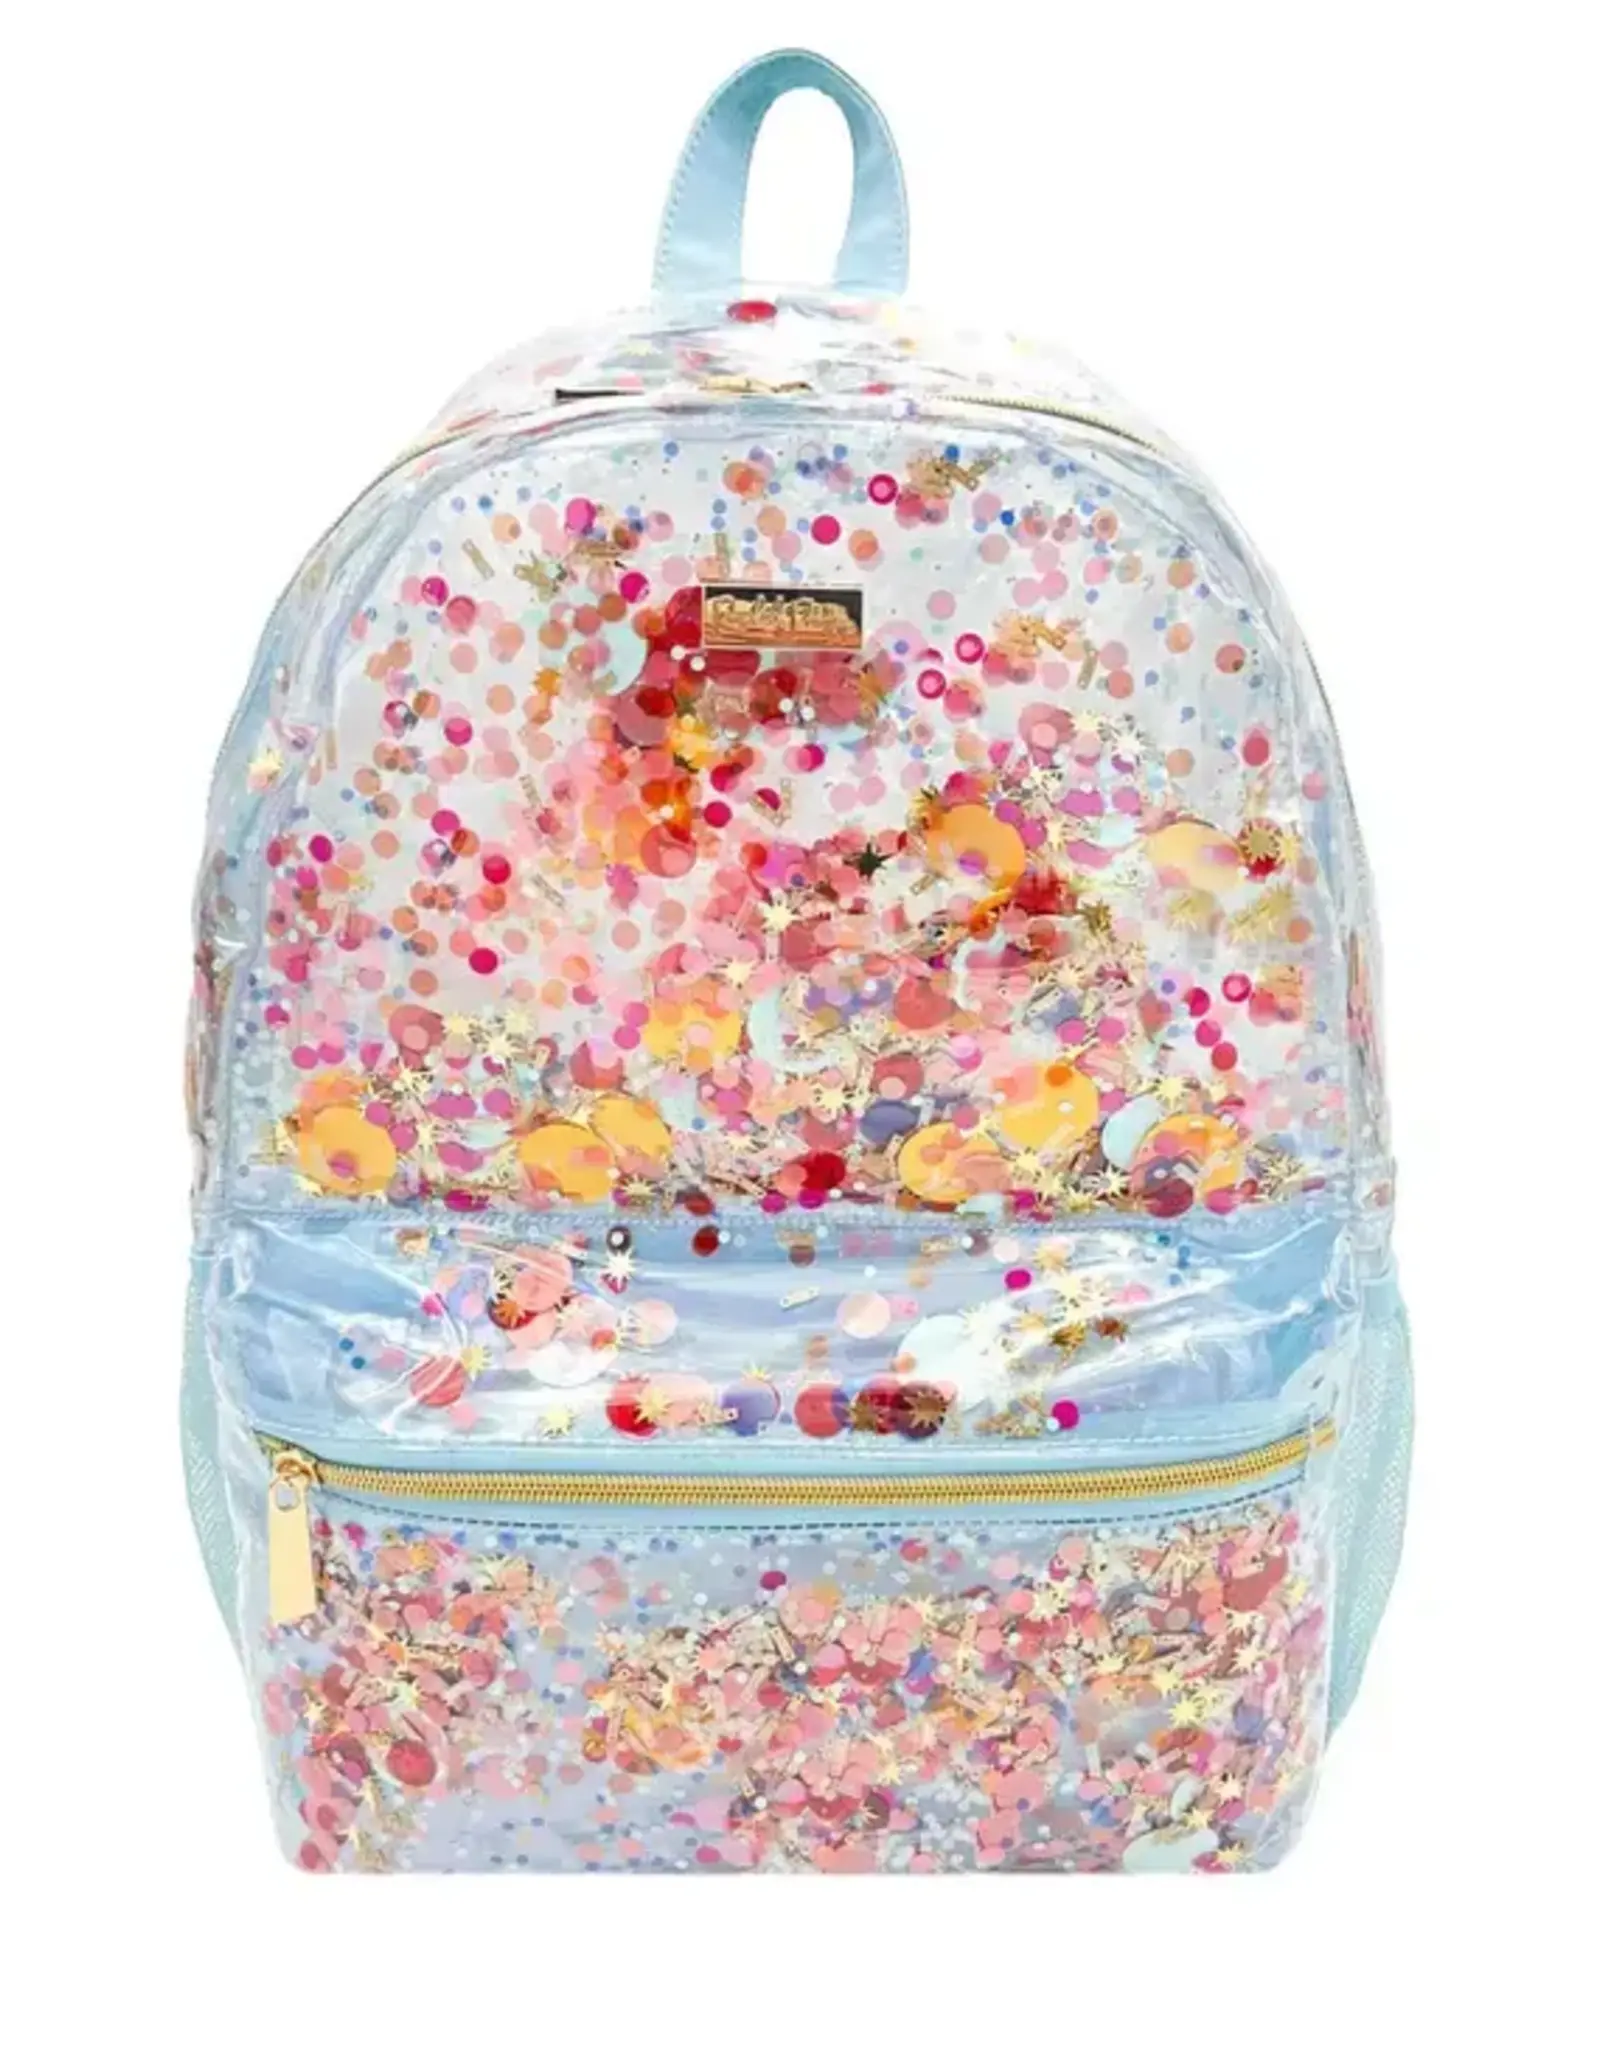 Packed Party Celebrate Confetti Clear Backpack